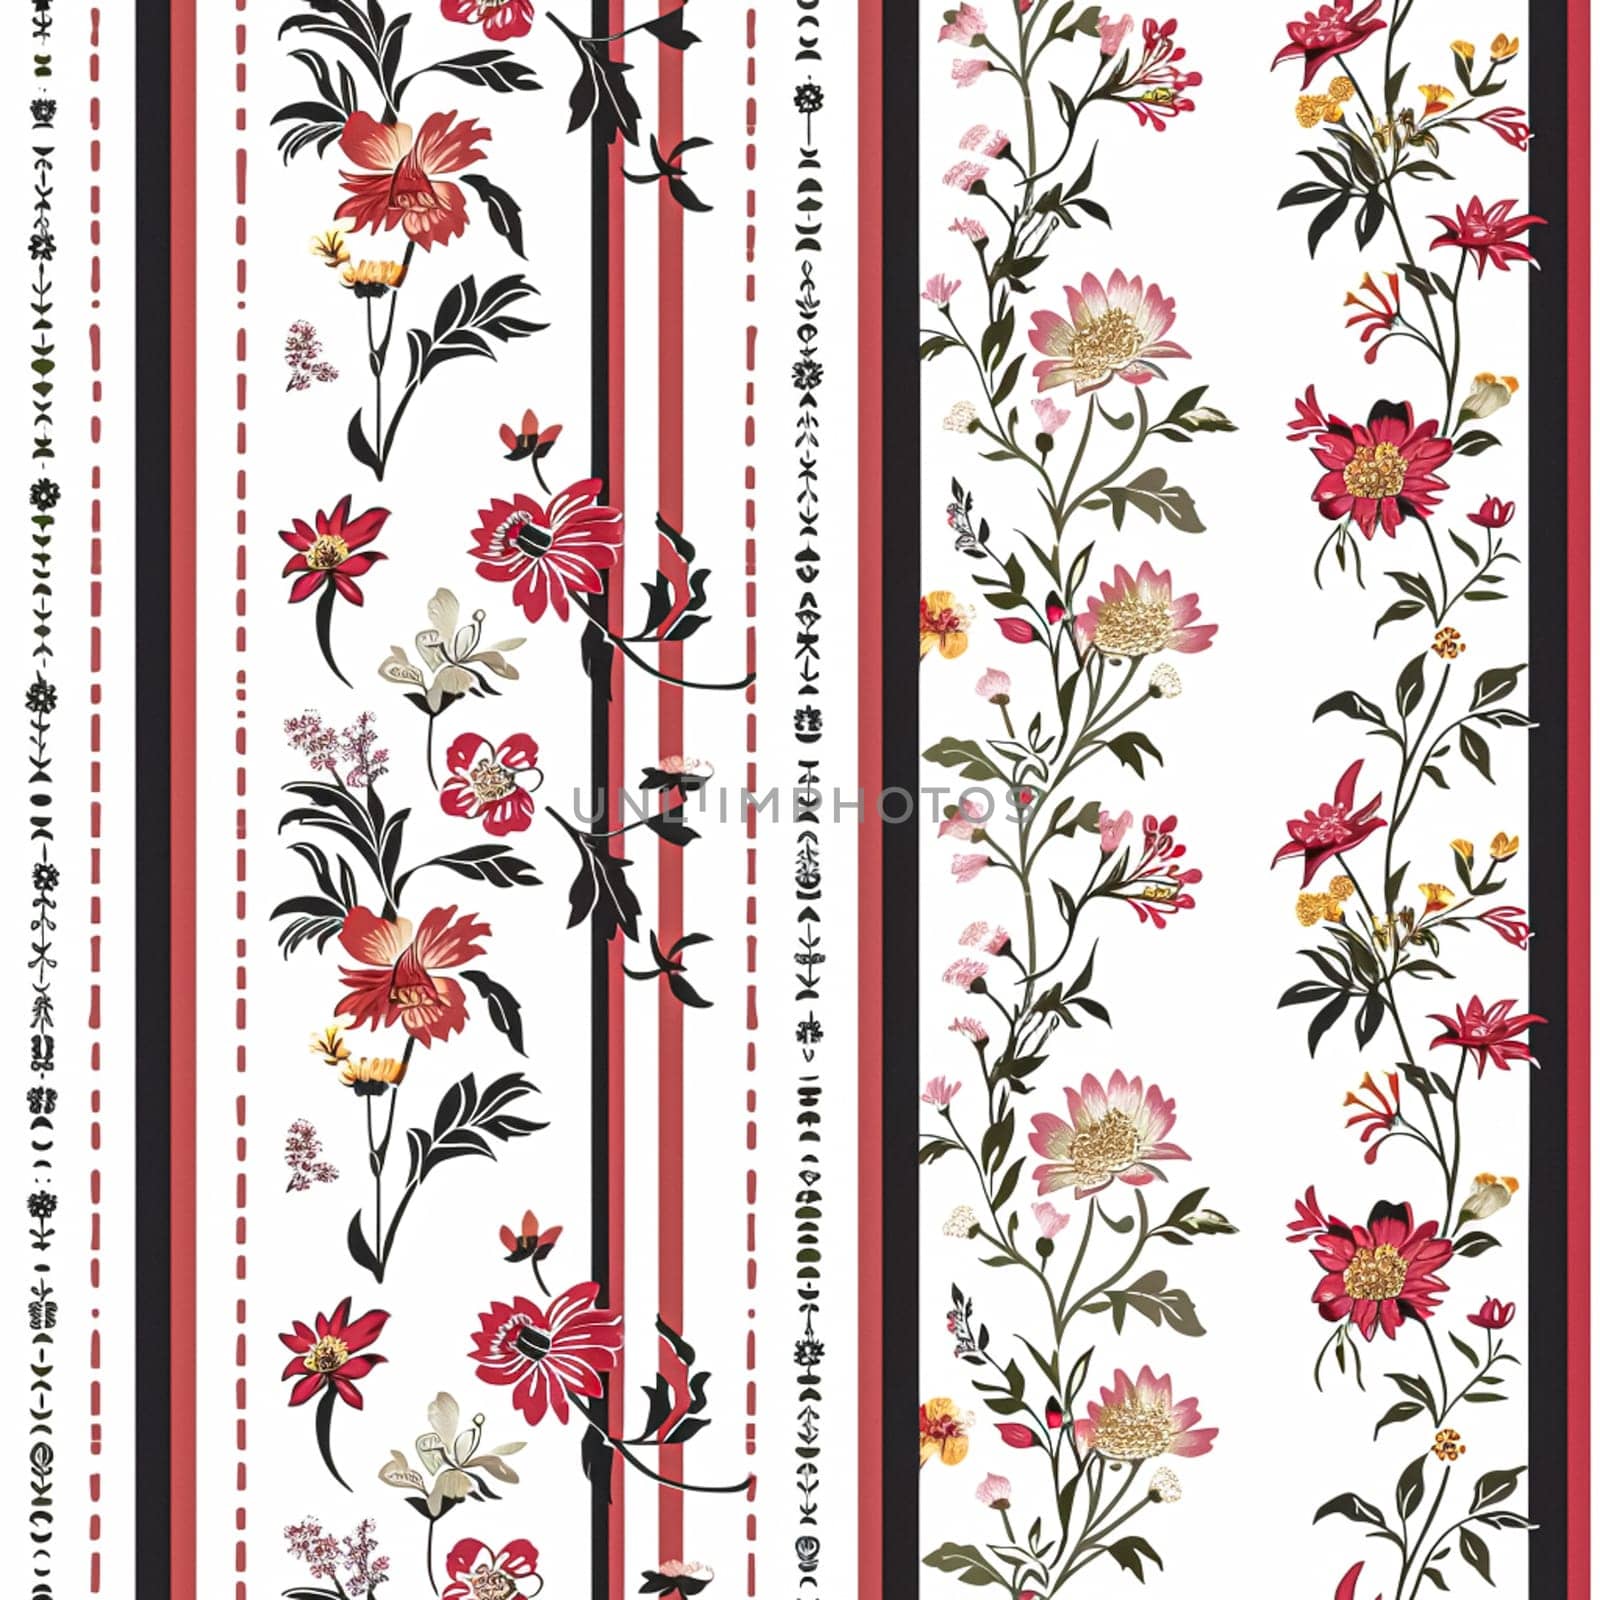 Seamless pattern, tileable floral holiday country cottage print, English countryside flowers theme for wallpaper, gift wrapping paper, scrapbook, fabric and product design inspiration